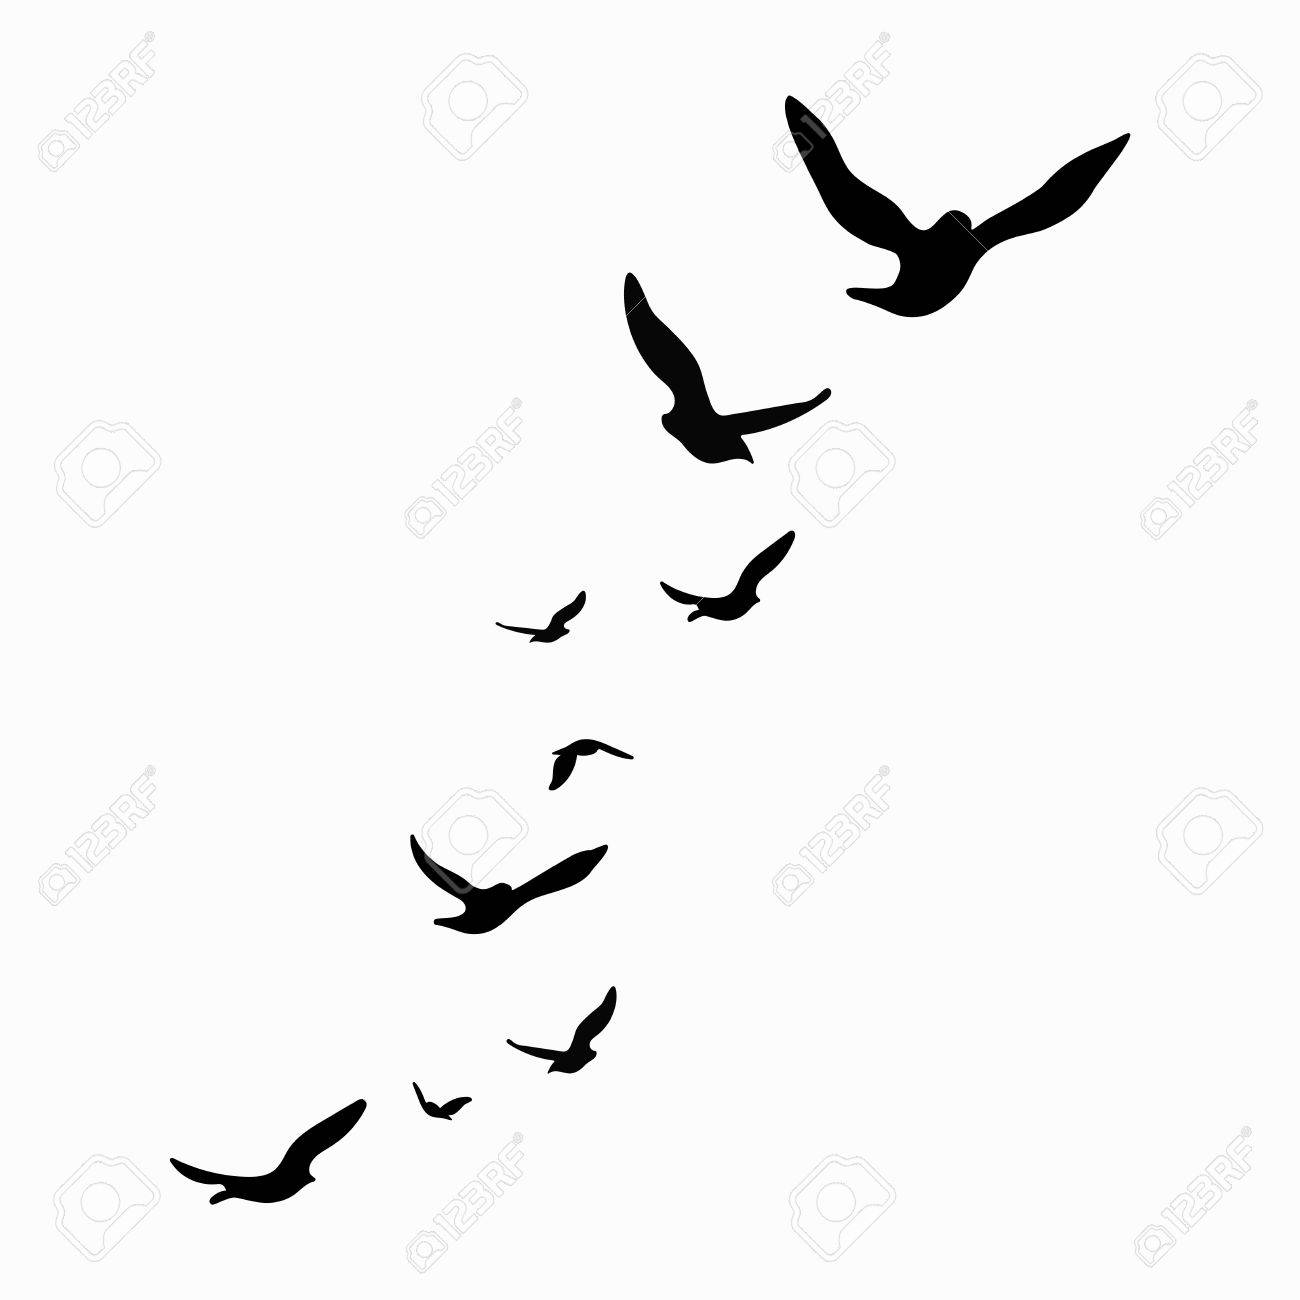 Silhouette Of A Flock Of Birds Black Contours Of Flying Birds in measurements 1300 X 1300